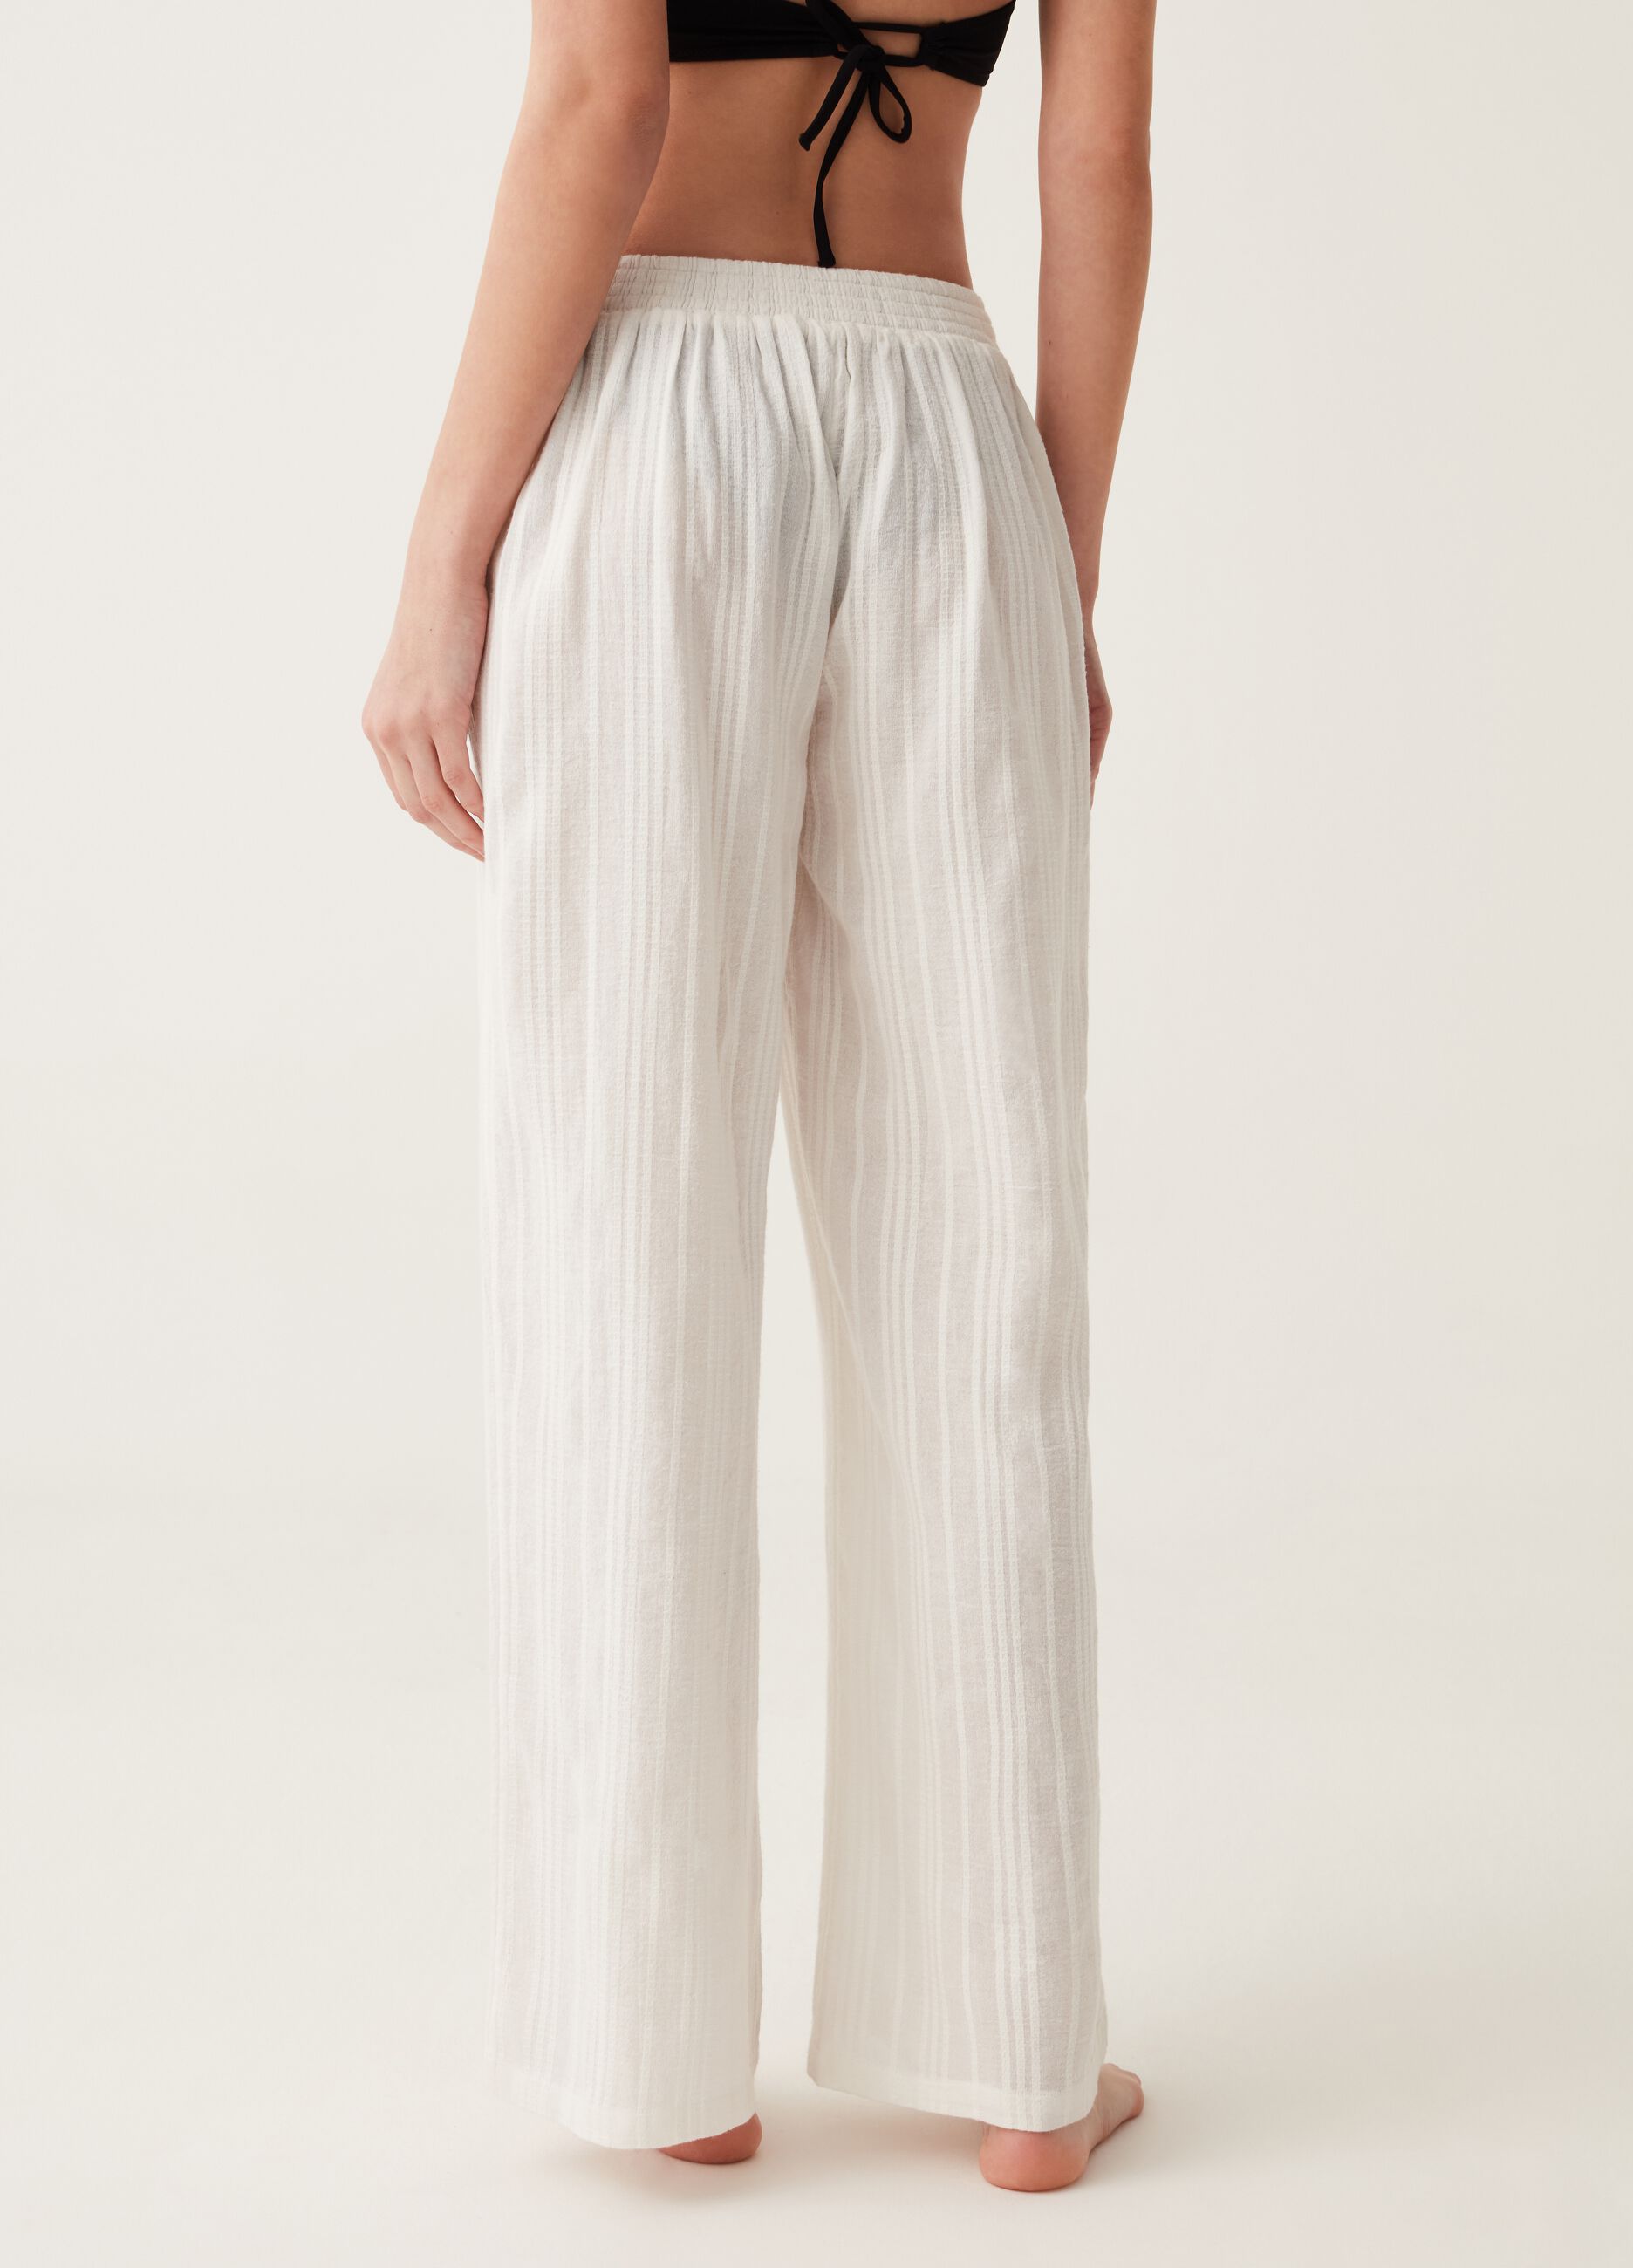 Striped cotton beach cover-up trousers